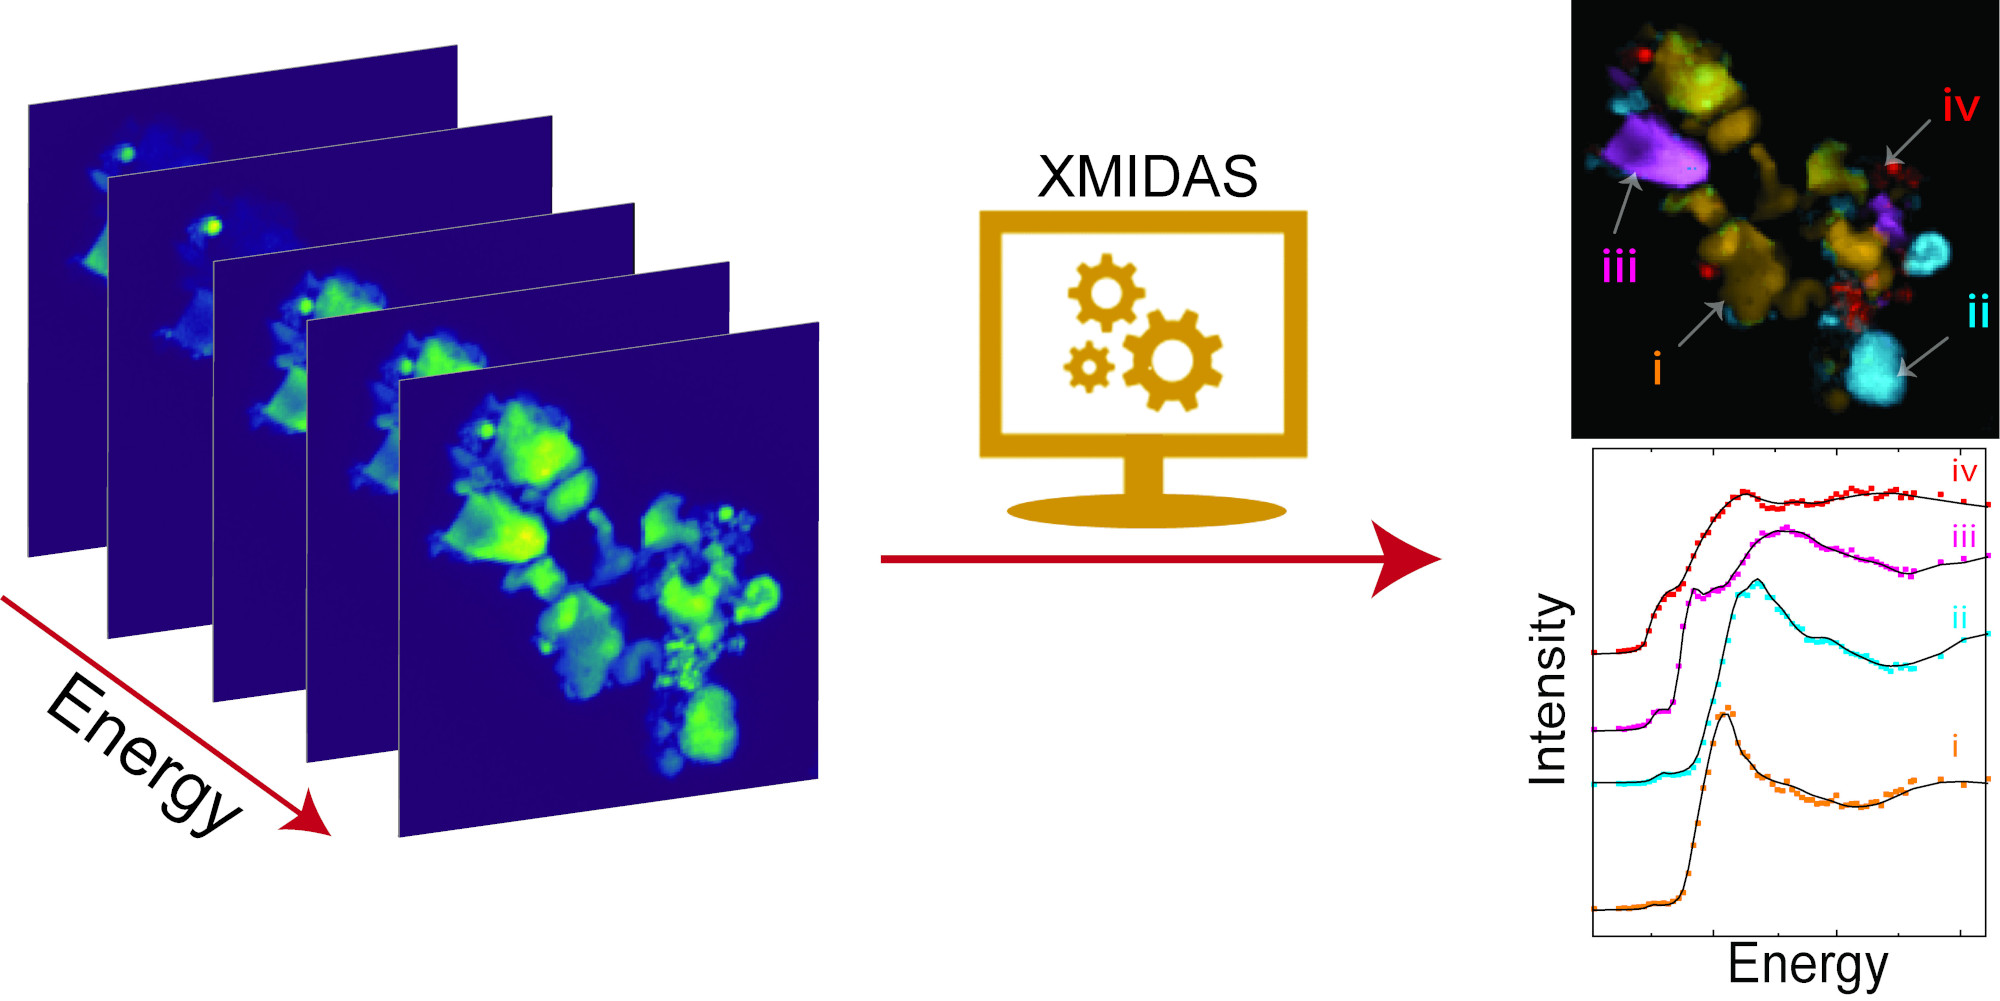 A graphical abstract showing how XMIDAS software processes spectromicrosopy data